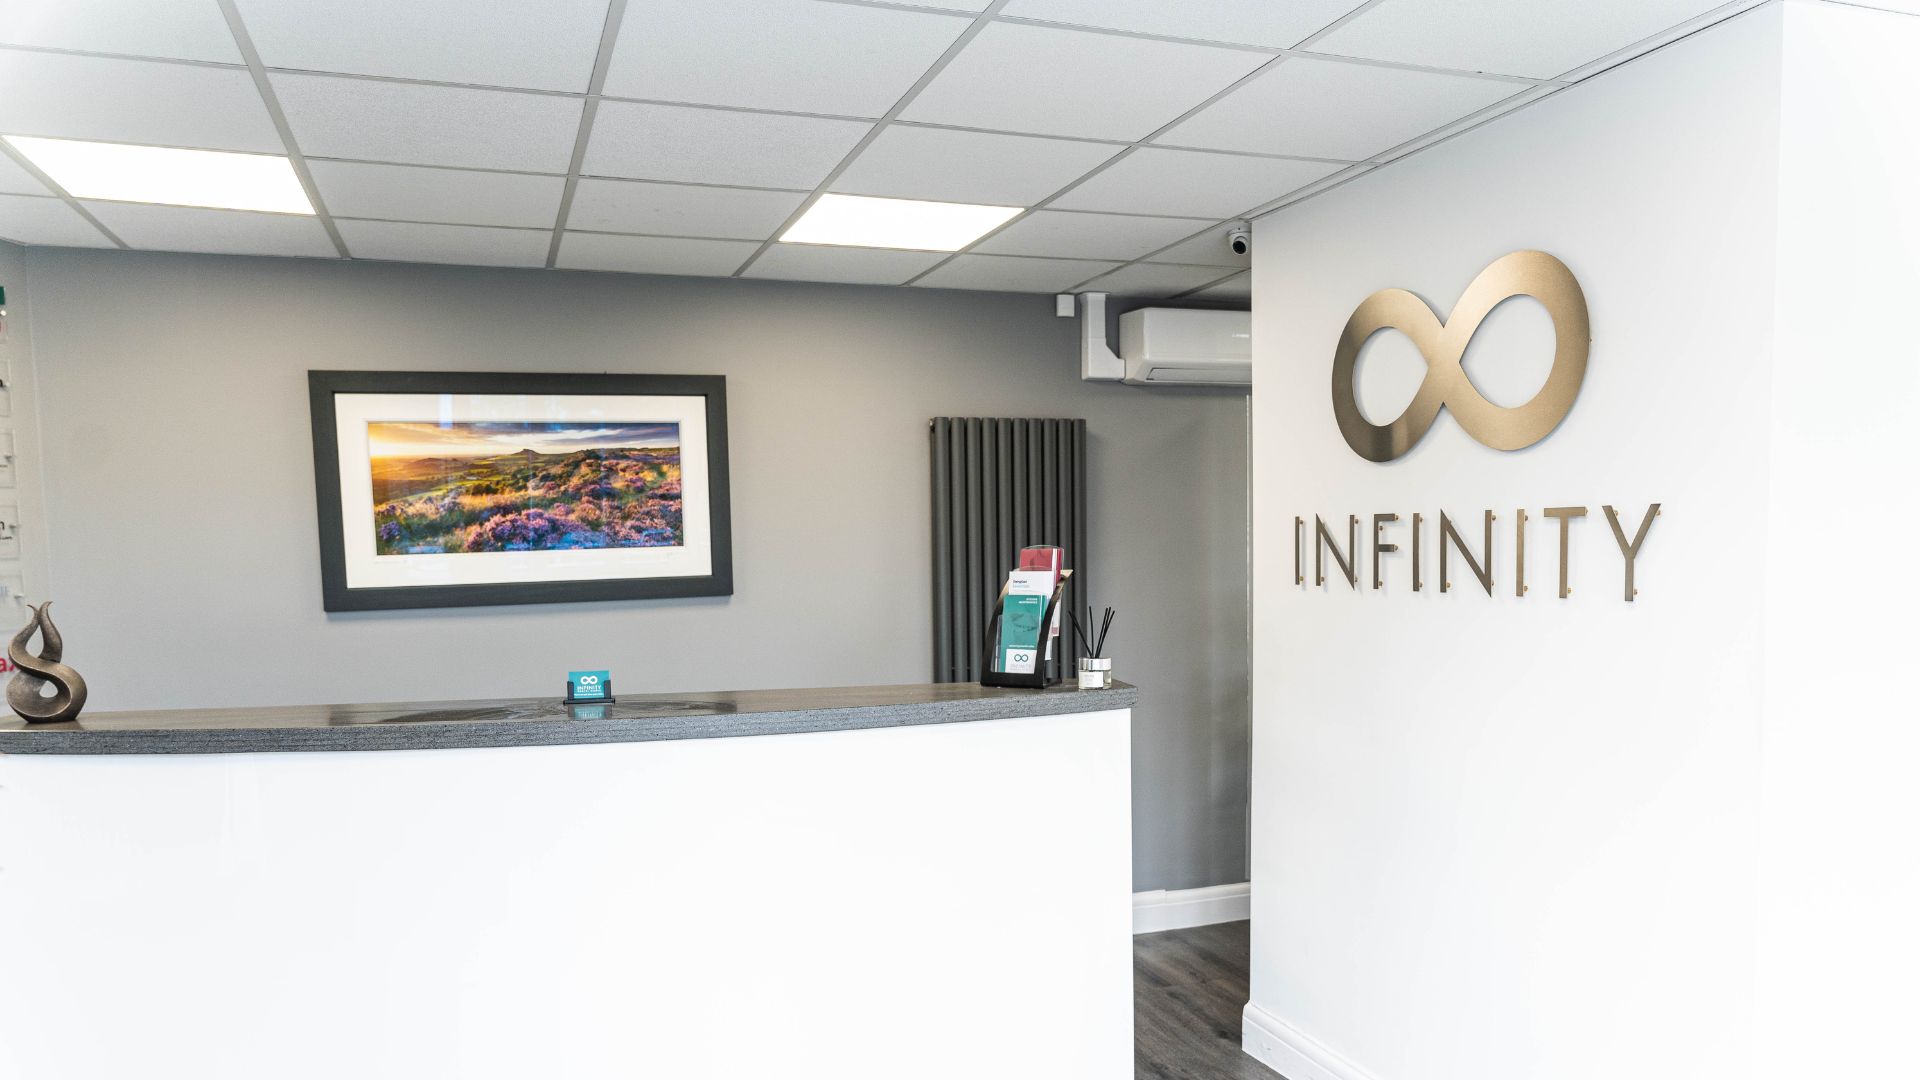 The infinity dental clinic reception desk and large logo on the wall